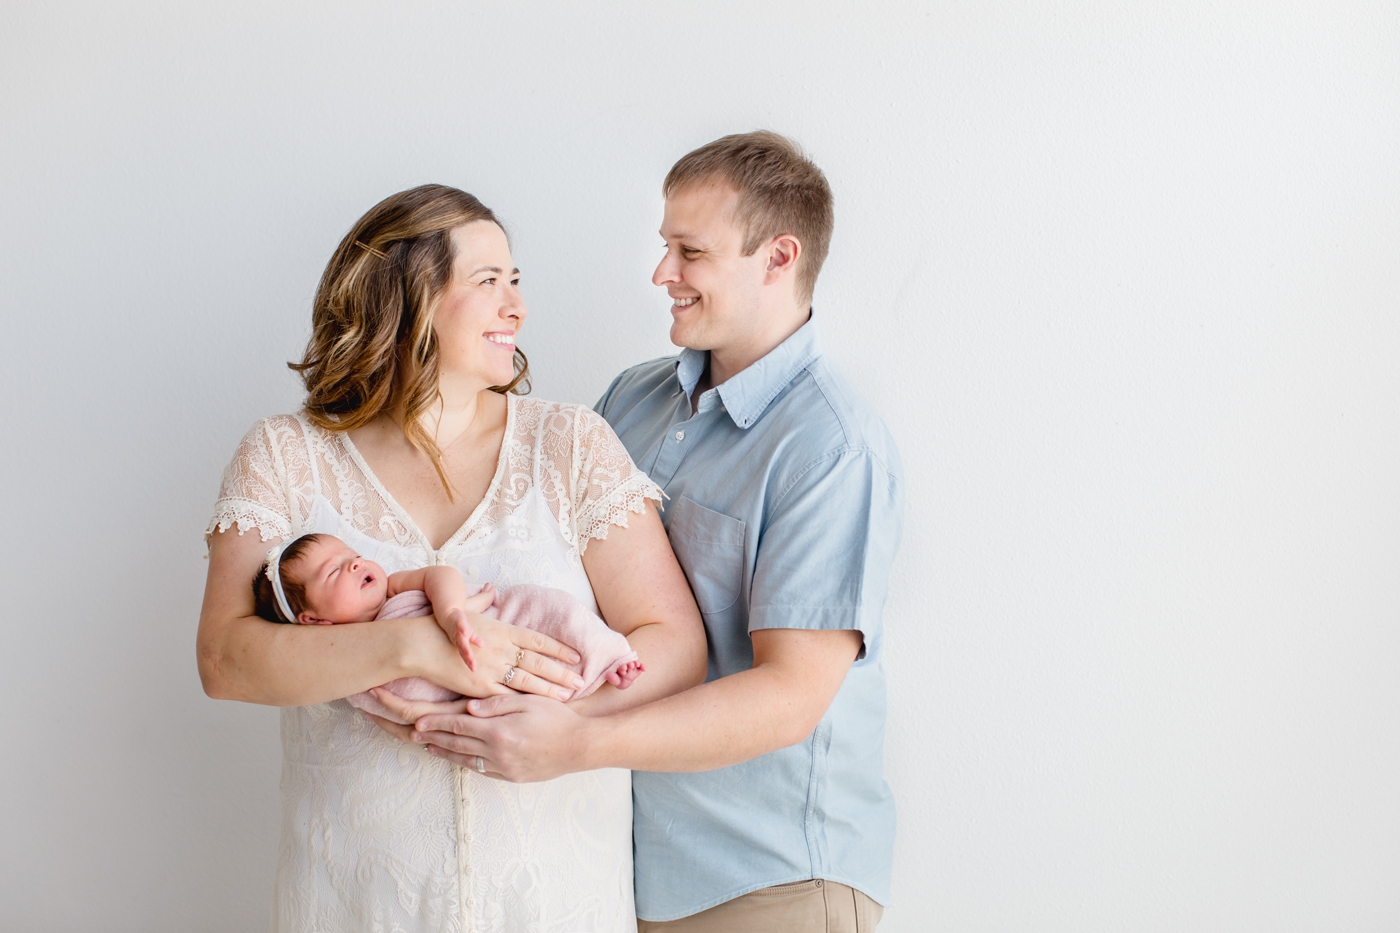 Mom and Dad smiling at each other during studio newborn session in Austin TX. Photo by Sana Ahmed Photography.